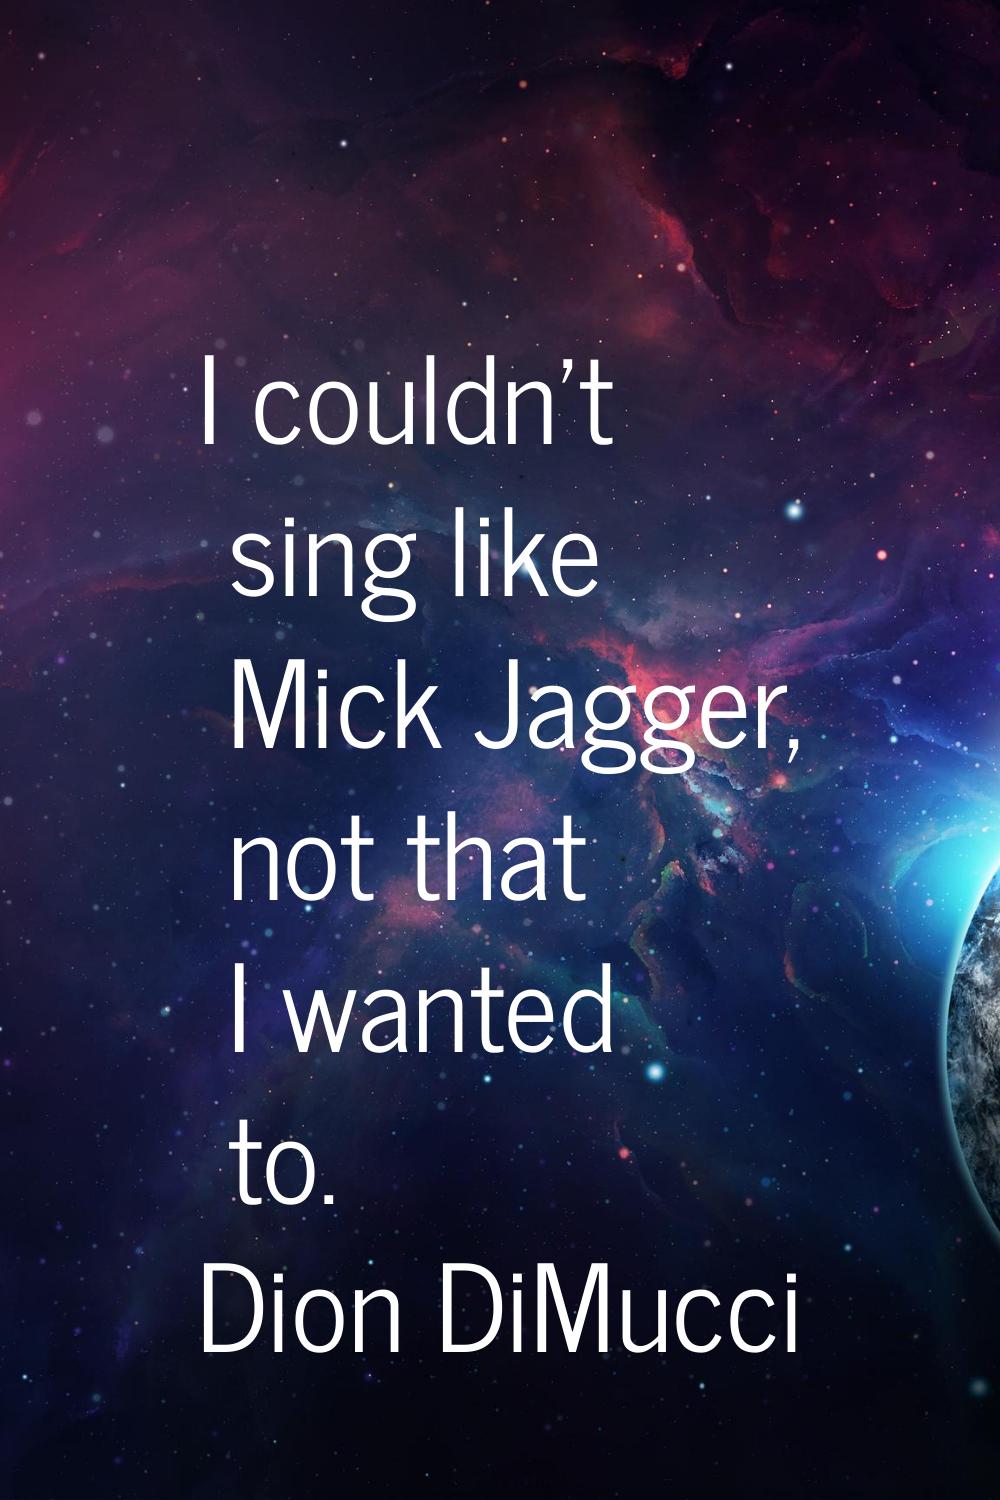 I couldn't sing like Mick Jagger, not that I wanted to.